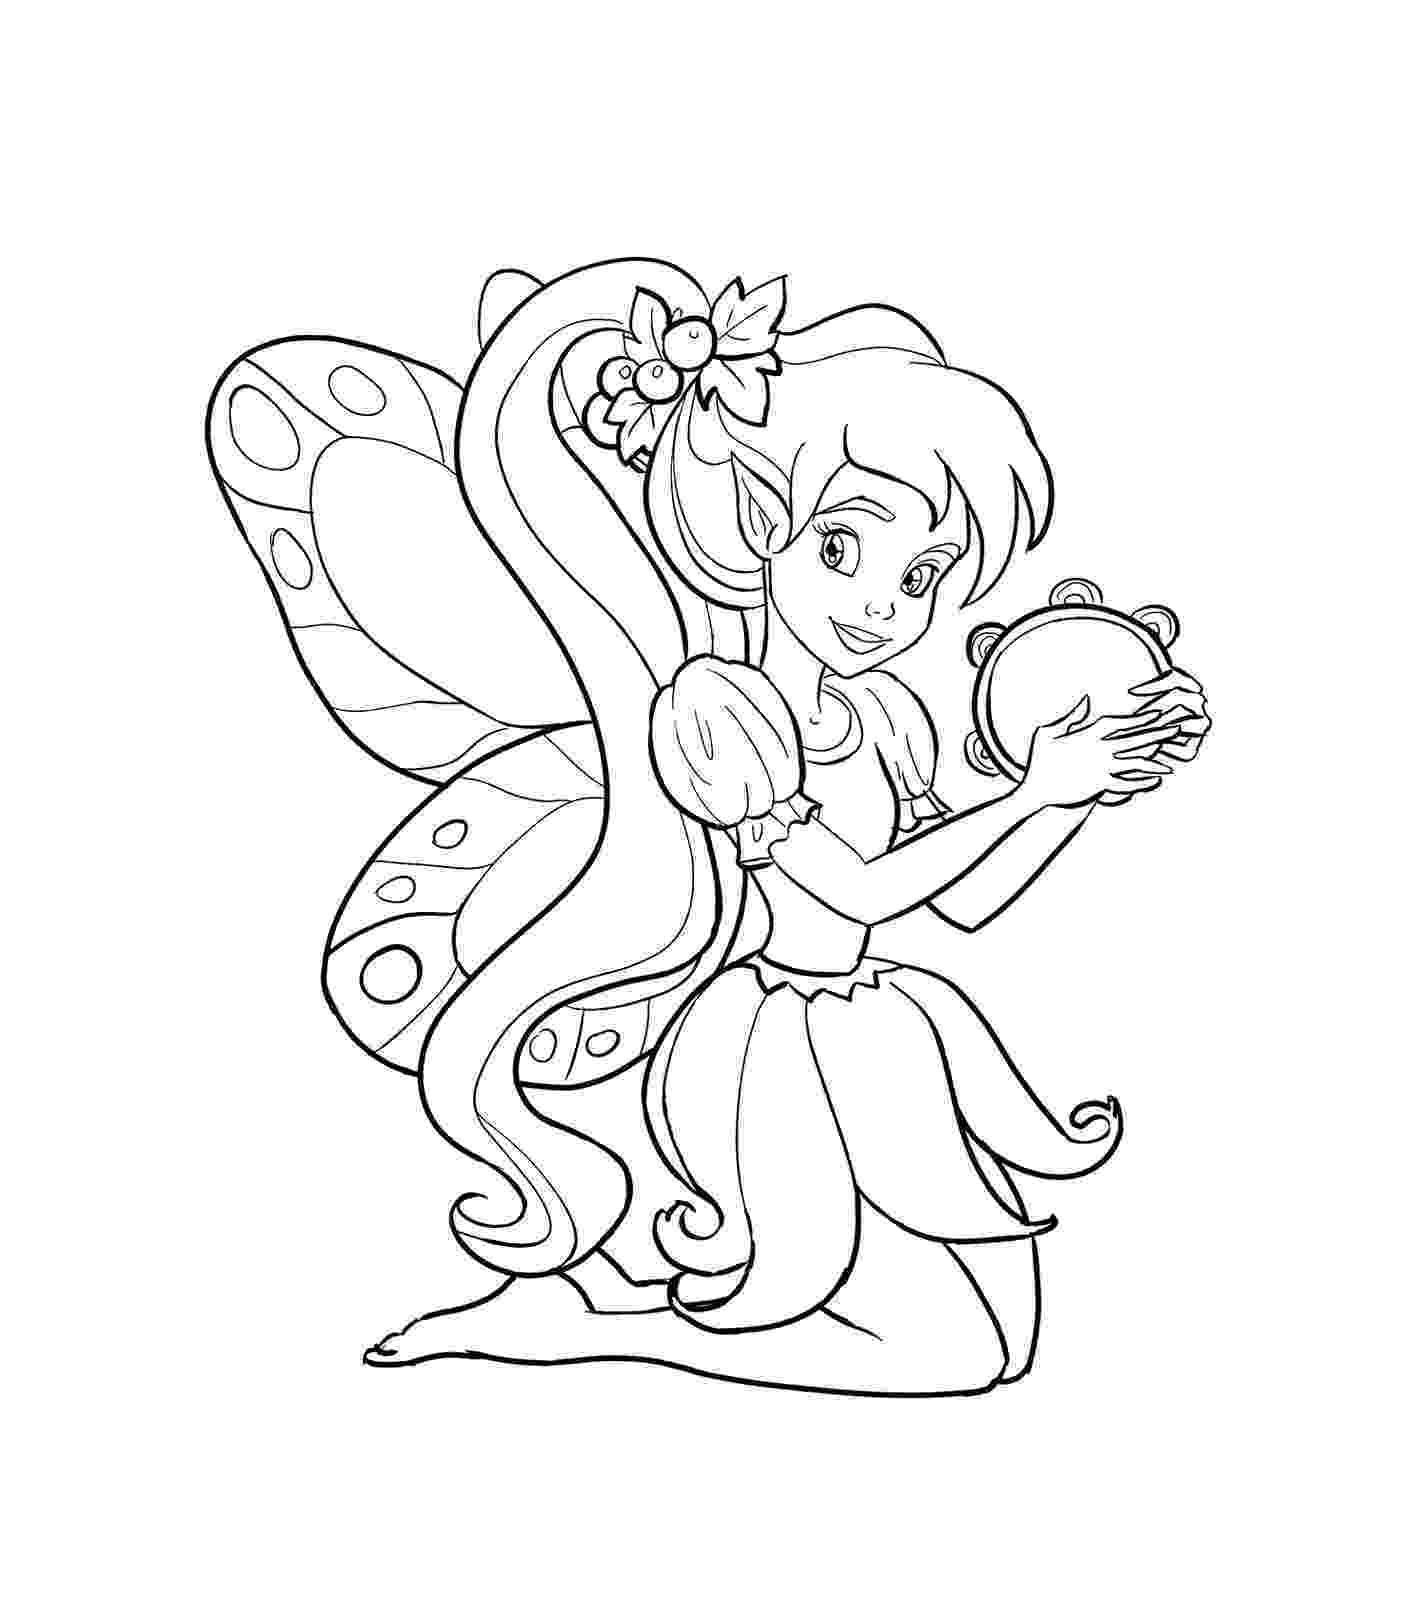 disney fairy pictures to color disney fairy silvermist coloring pages download and print disney color pictures to fairy 